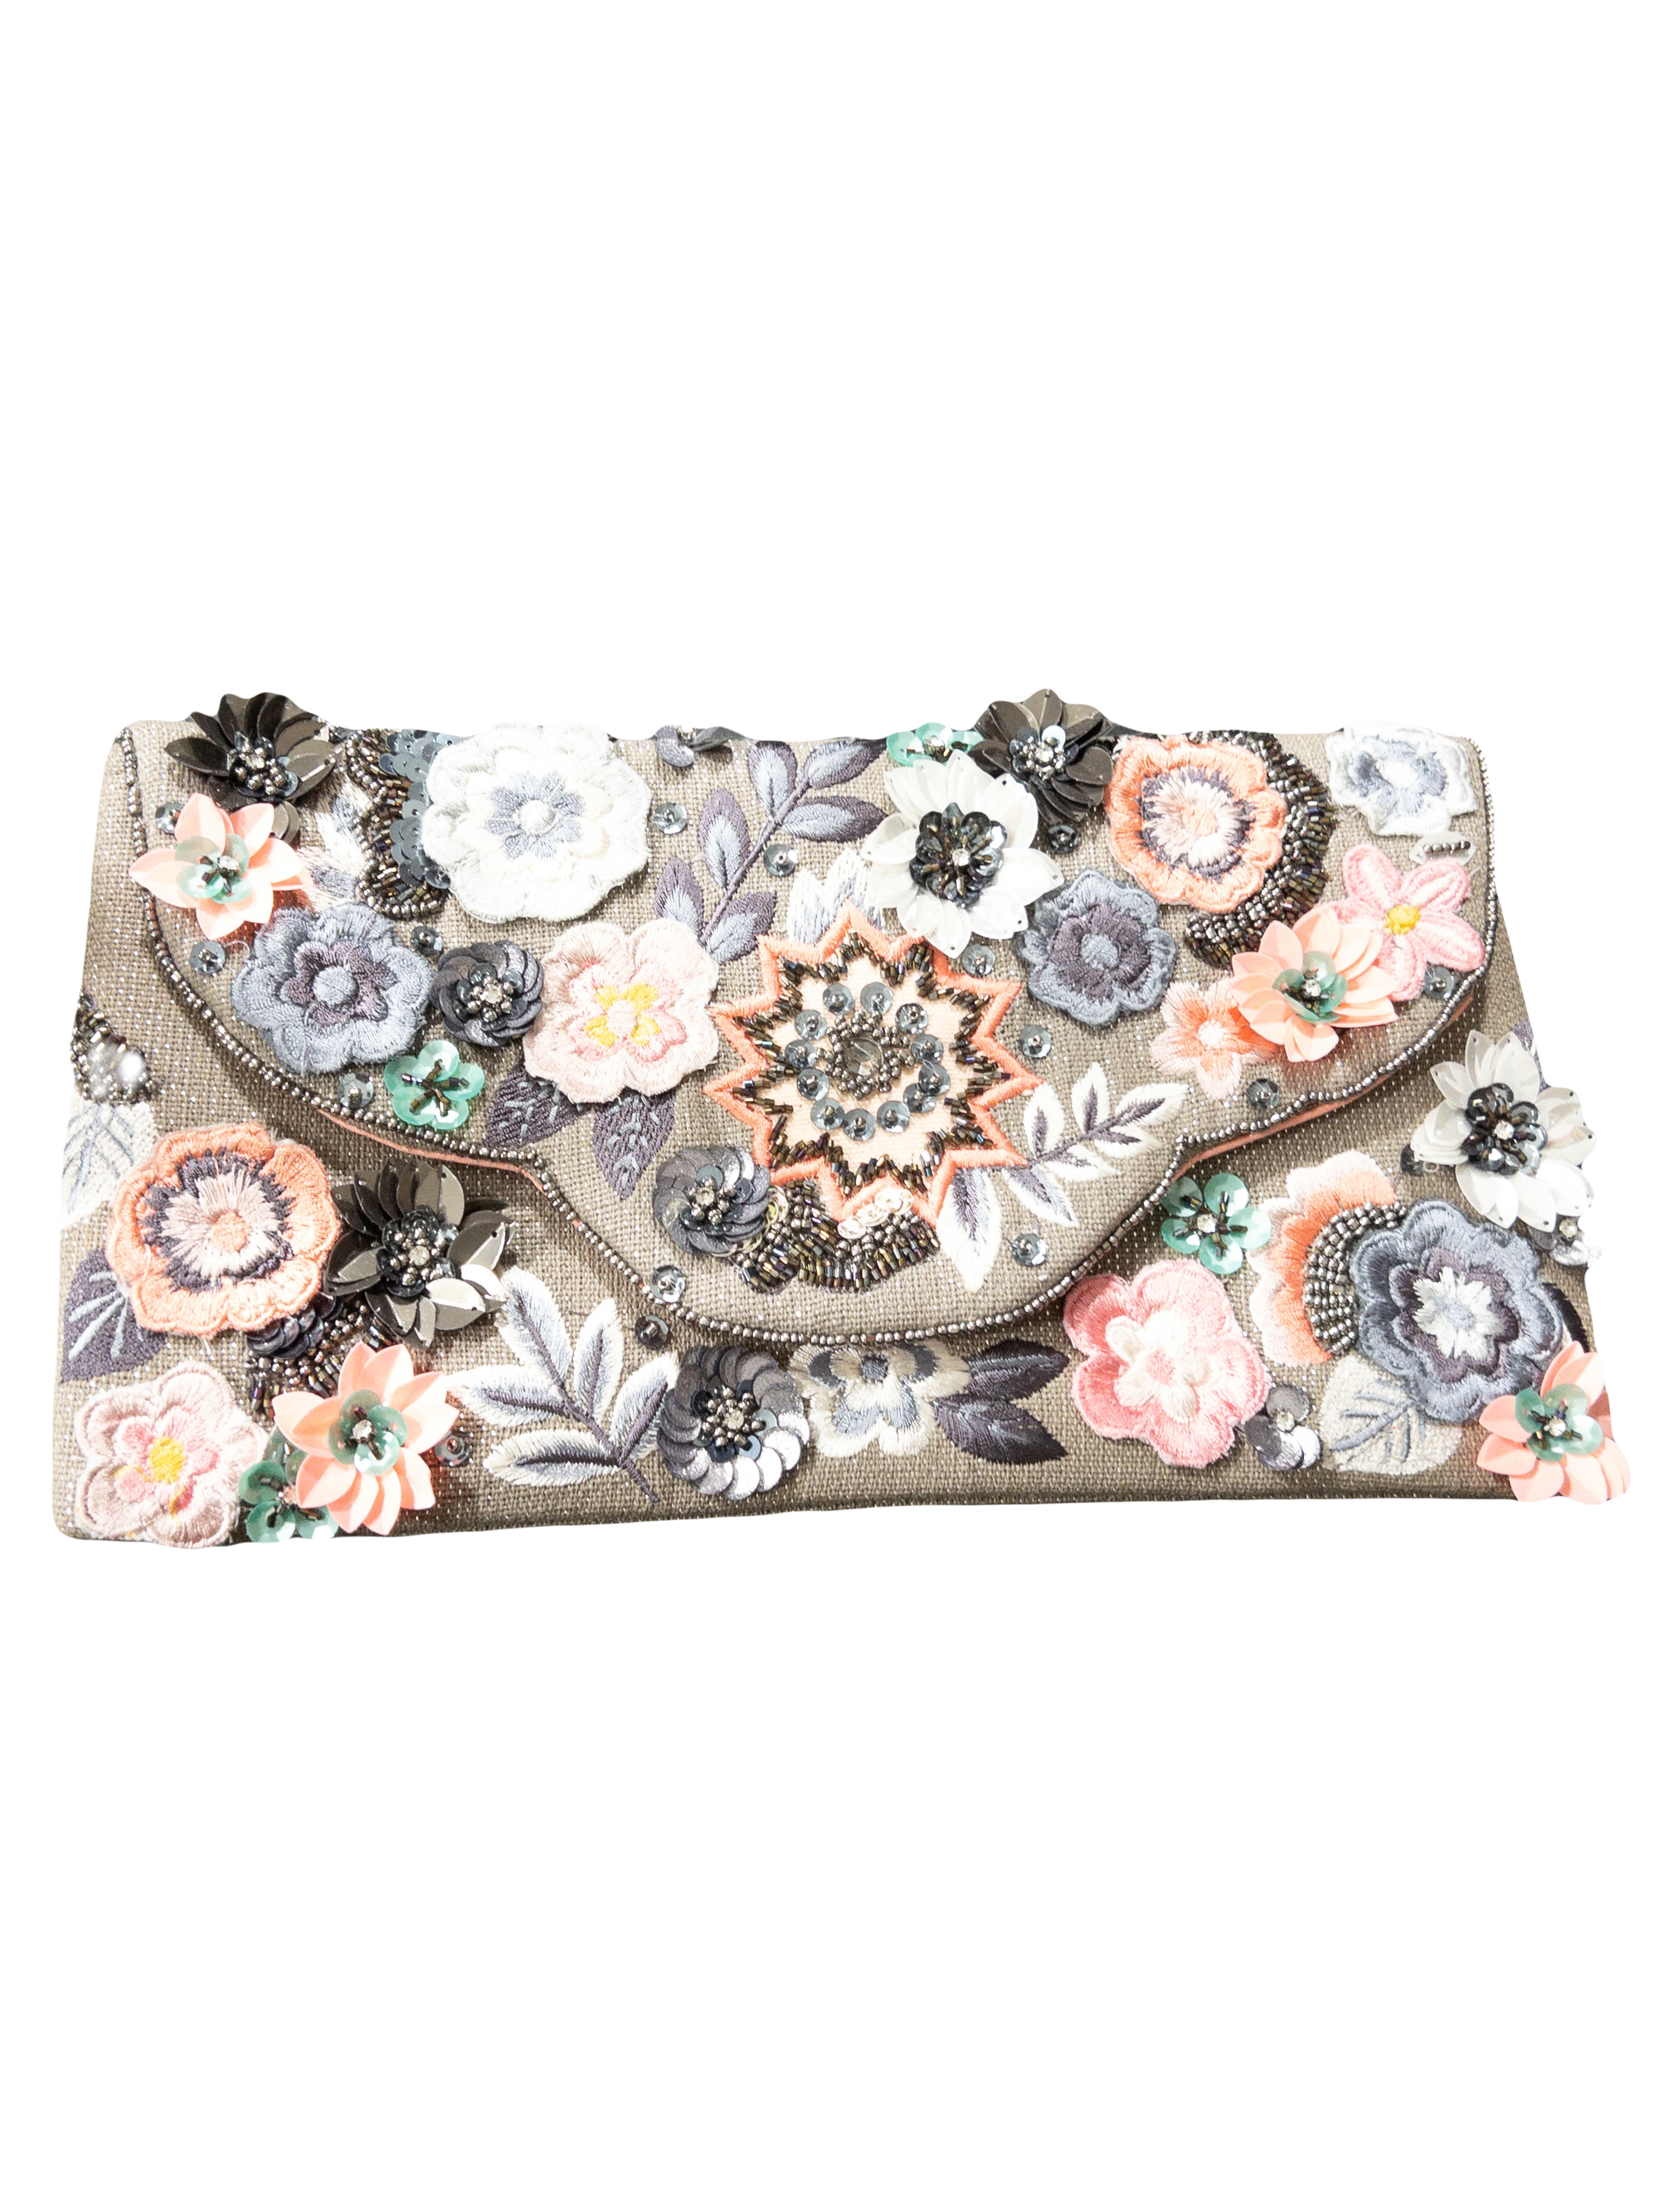 GRAY SHIMMER FLORAL CLUTCH LA CHIC